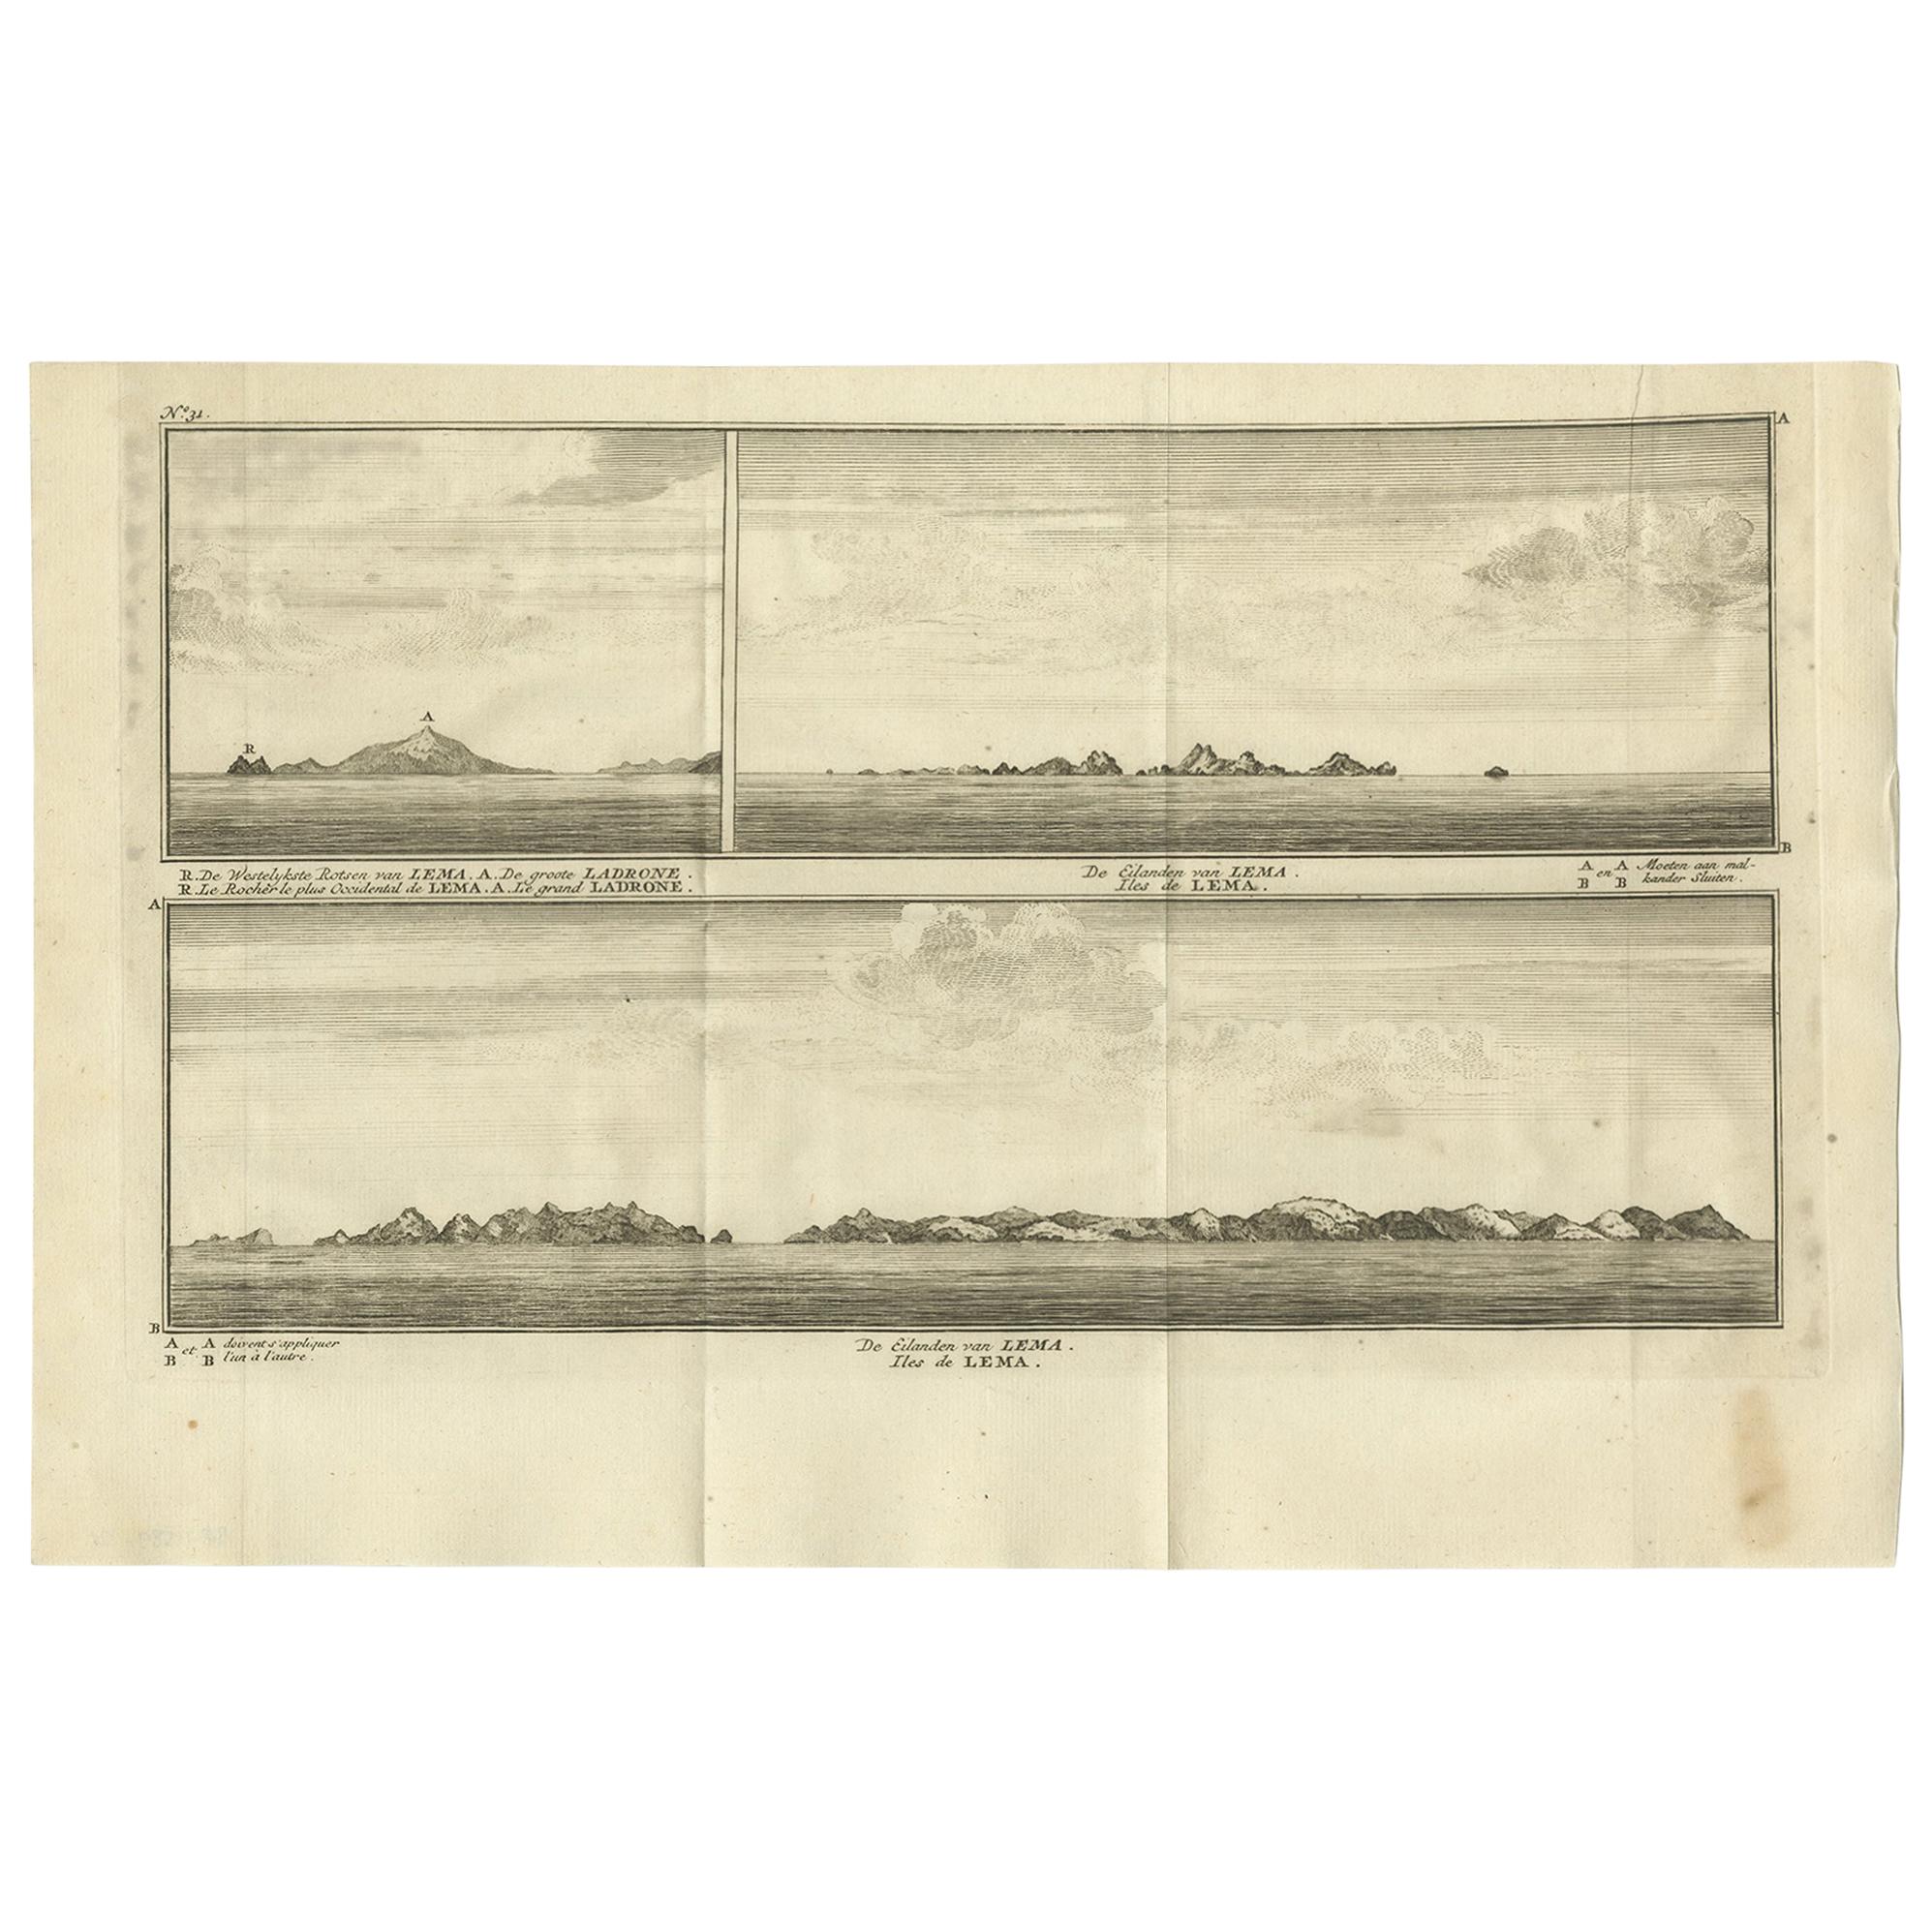 Antique Print with Views of the Lema Islands by Anson '1749'